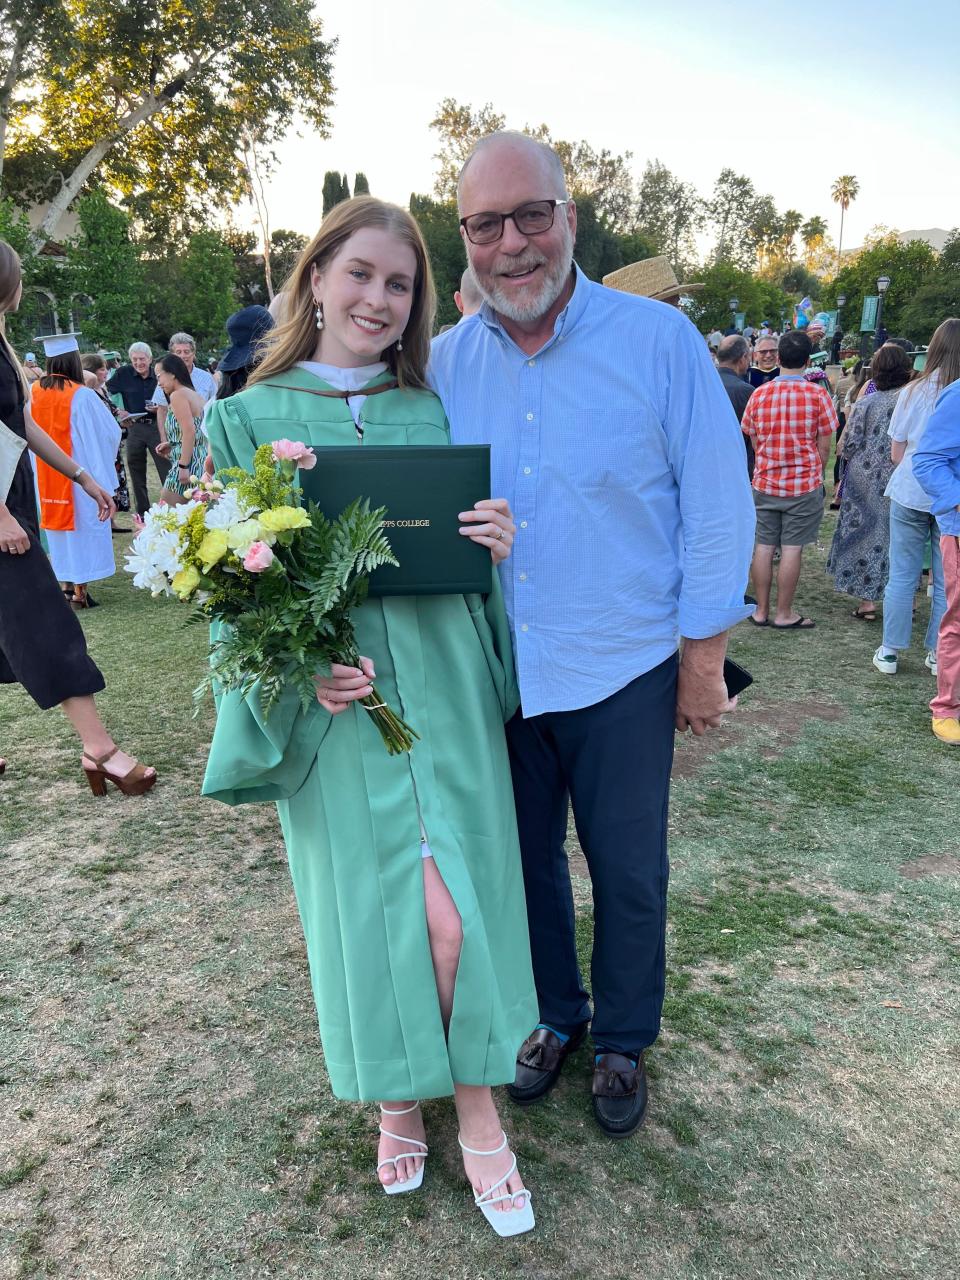 Emma Thompson and her dad, Scott Thompson, at her graduation from Scripps College in Claremont, California, in 2022. Scott Thompson describes himself as a laid-back dad who is proud he only missed one field trip when Emma and her brother Zach were in grade school. 